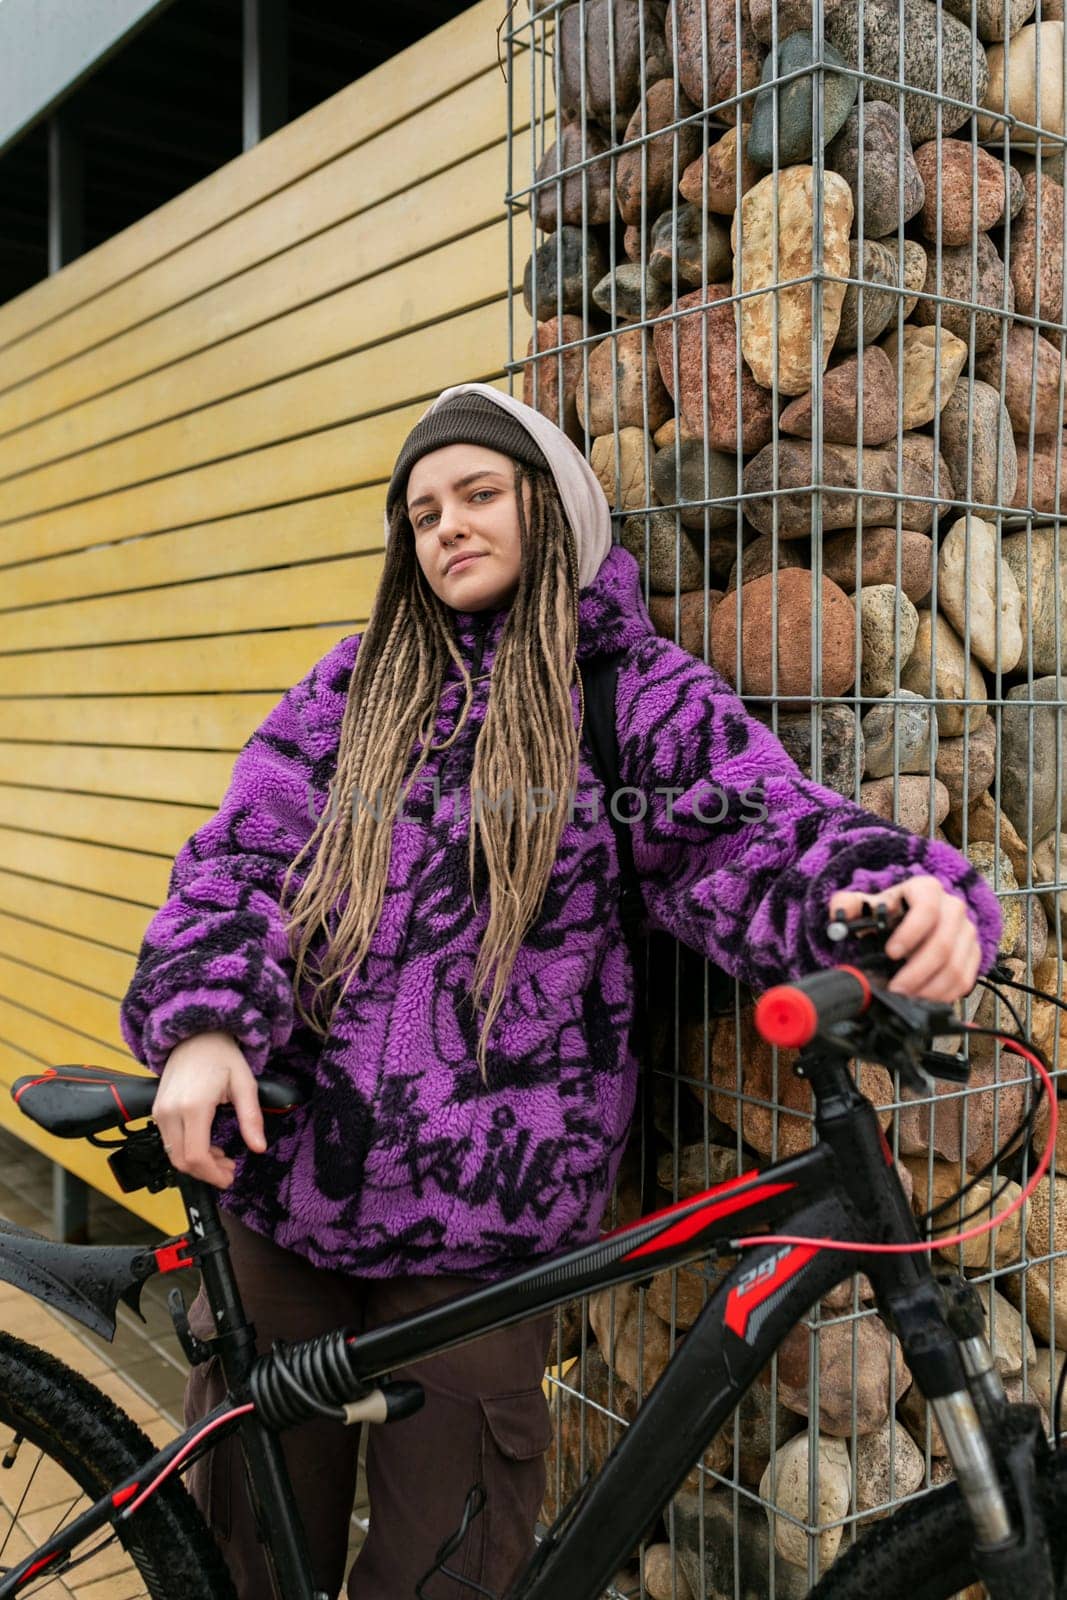 Cute young woman with piercings and dreadlocks rented a bike around the city by TRMK